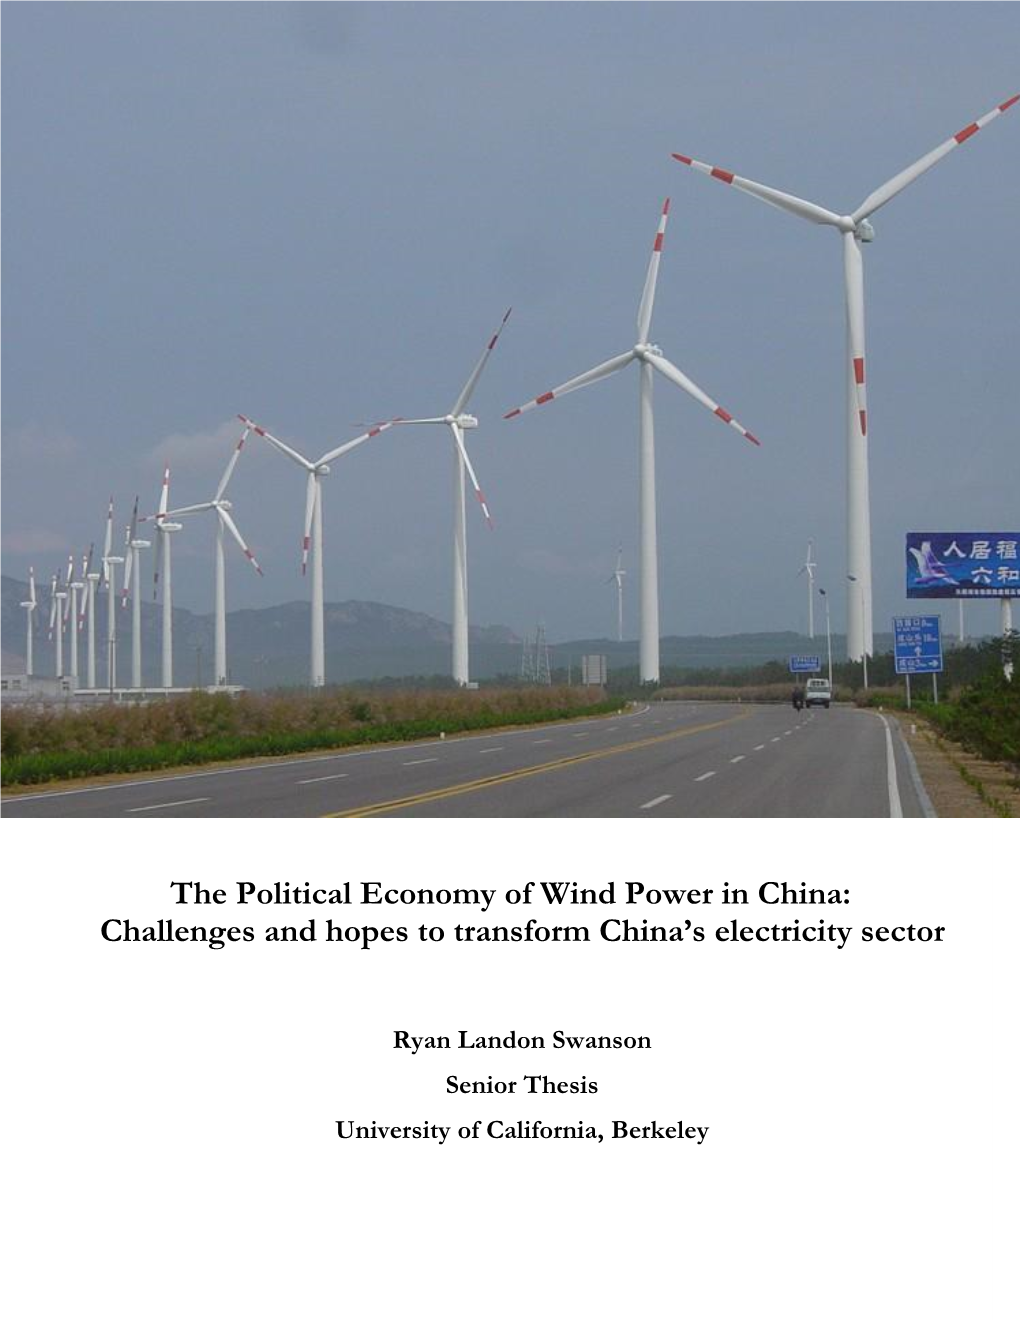 The Political Economy of Wind Power in China: Challenges and Hopes to Transform China’S Electricity Sector